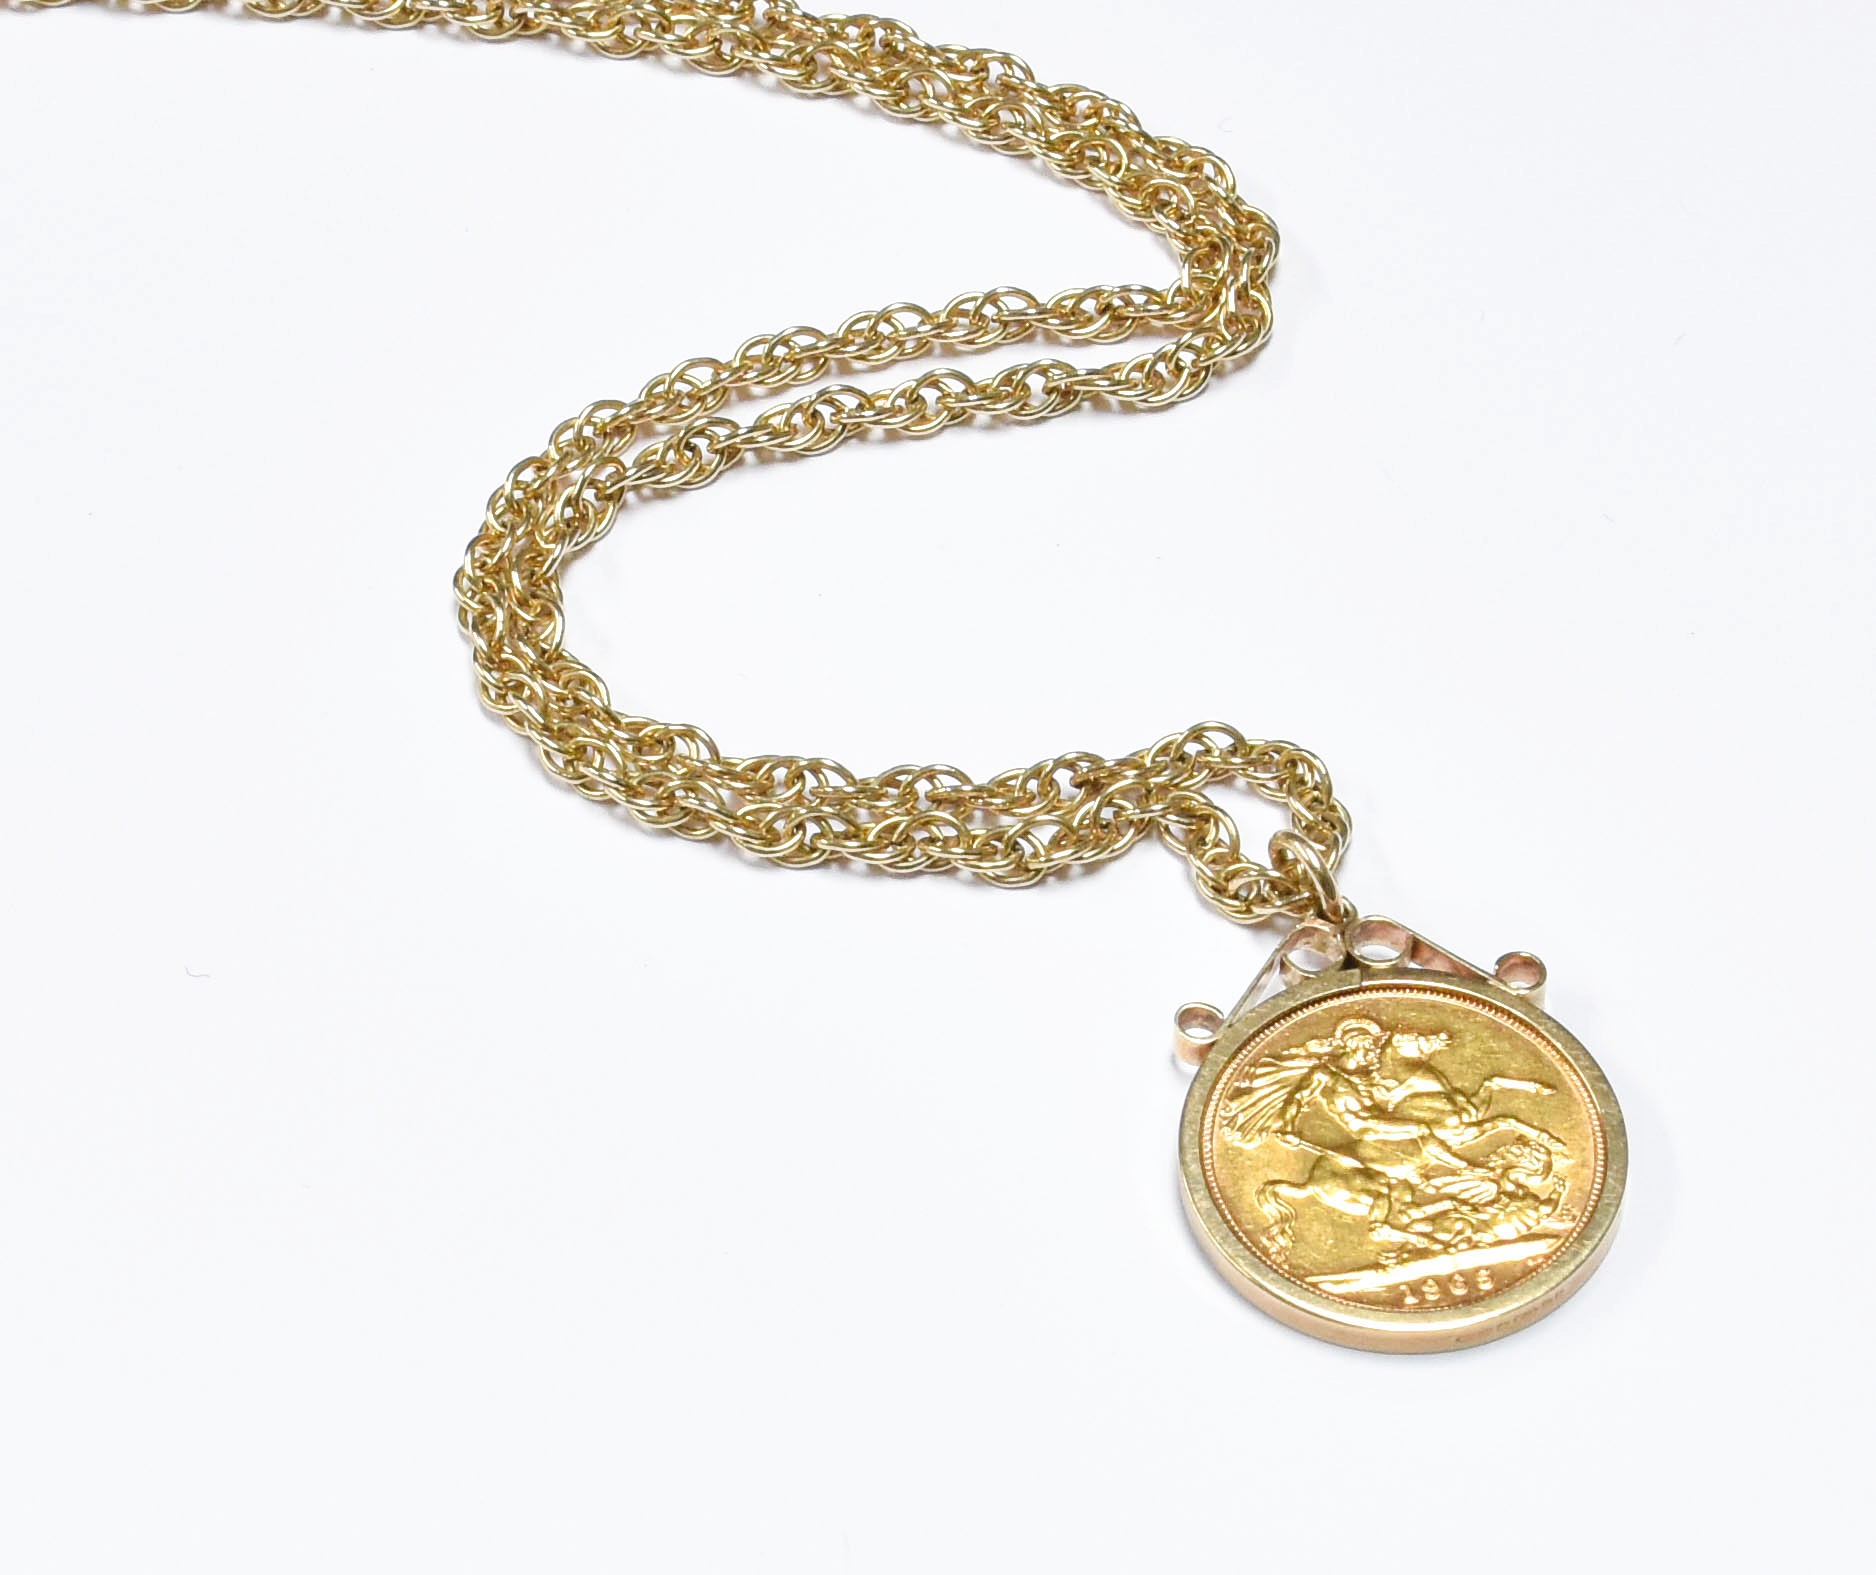 Lot 118 - A Sovereign Pendant on Chain, dated 1965,